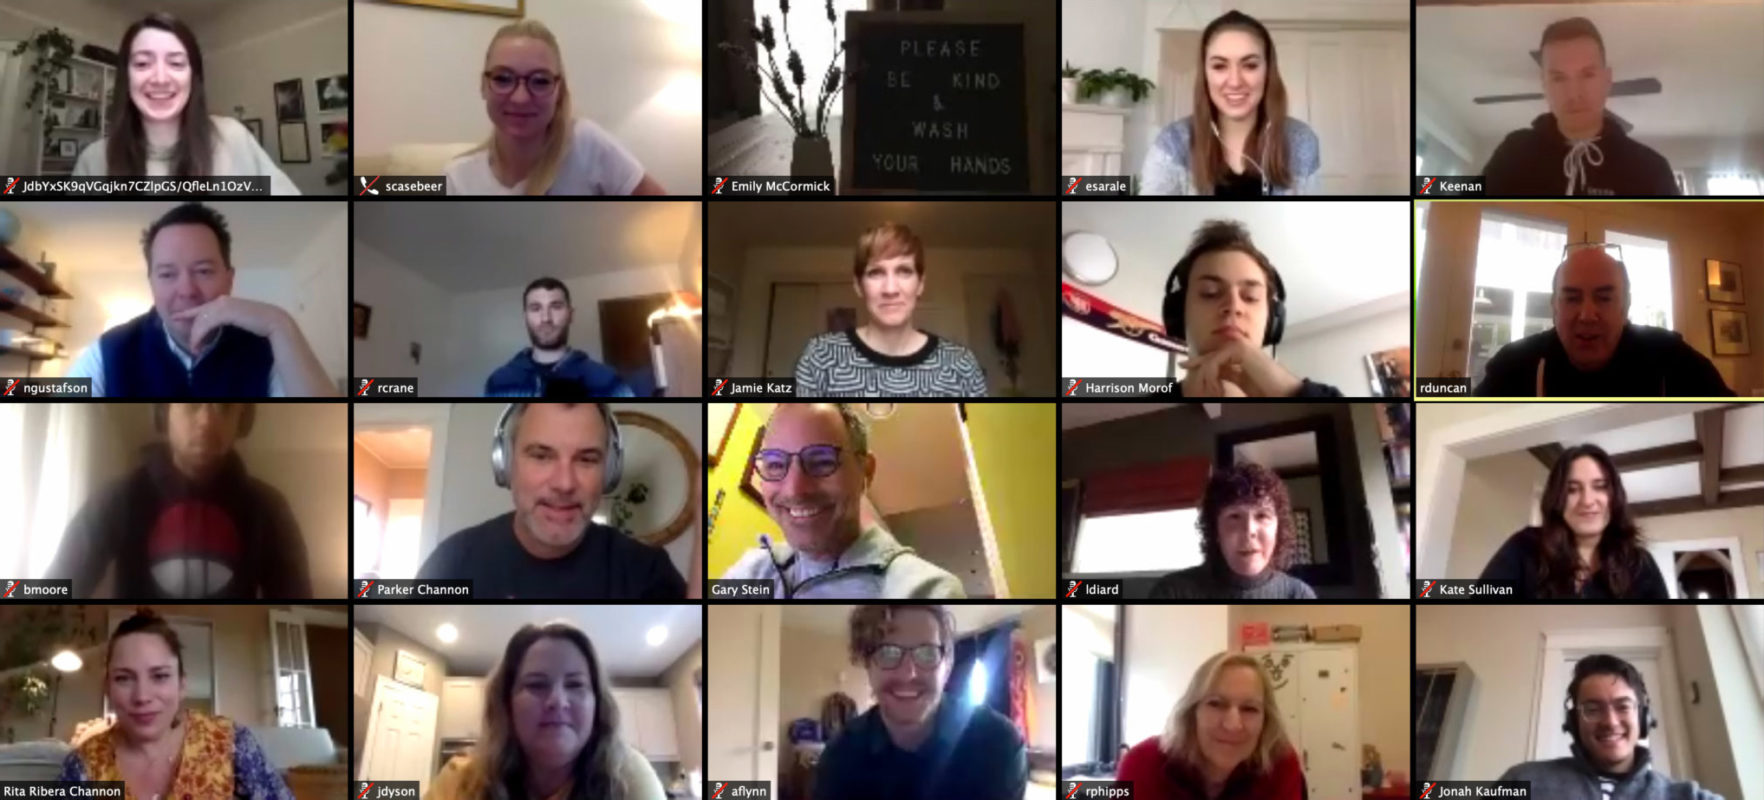 Grid image of 20 US employees on video conference call together. They are diverse in their age and their genders. They all appear smiling and some chatting like they are familiar with each other and enjoy working together.